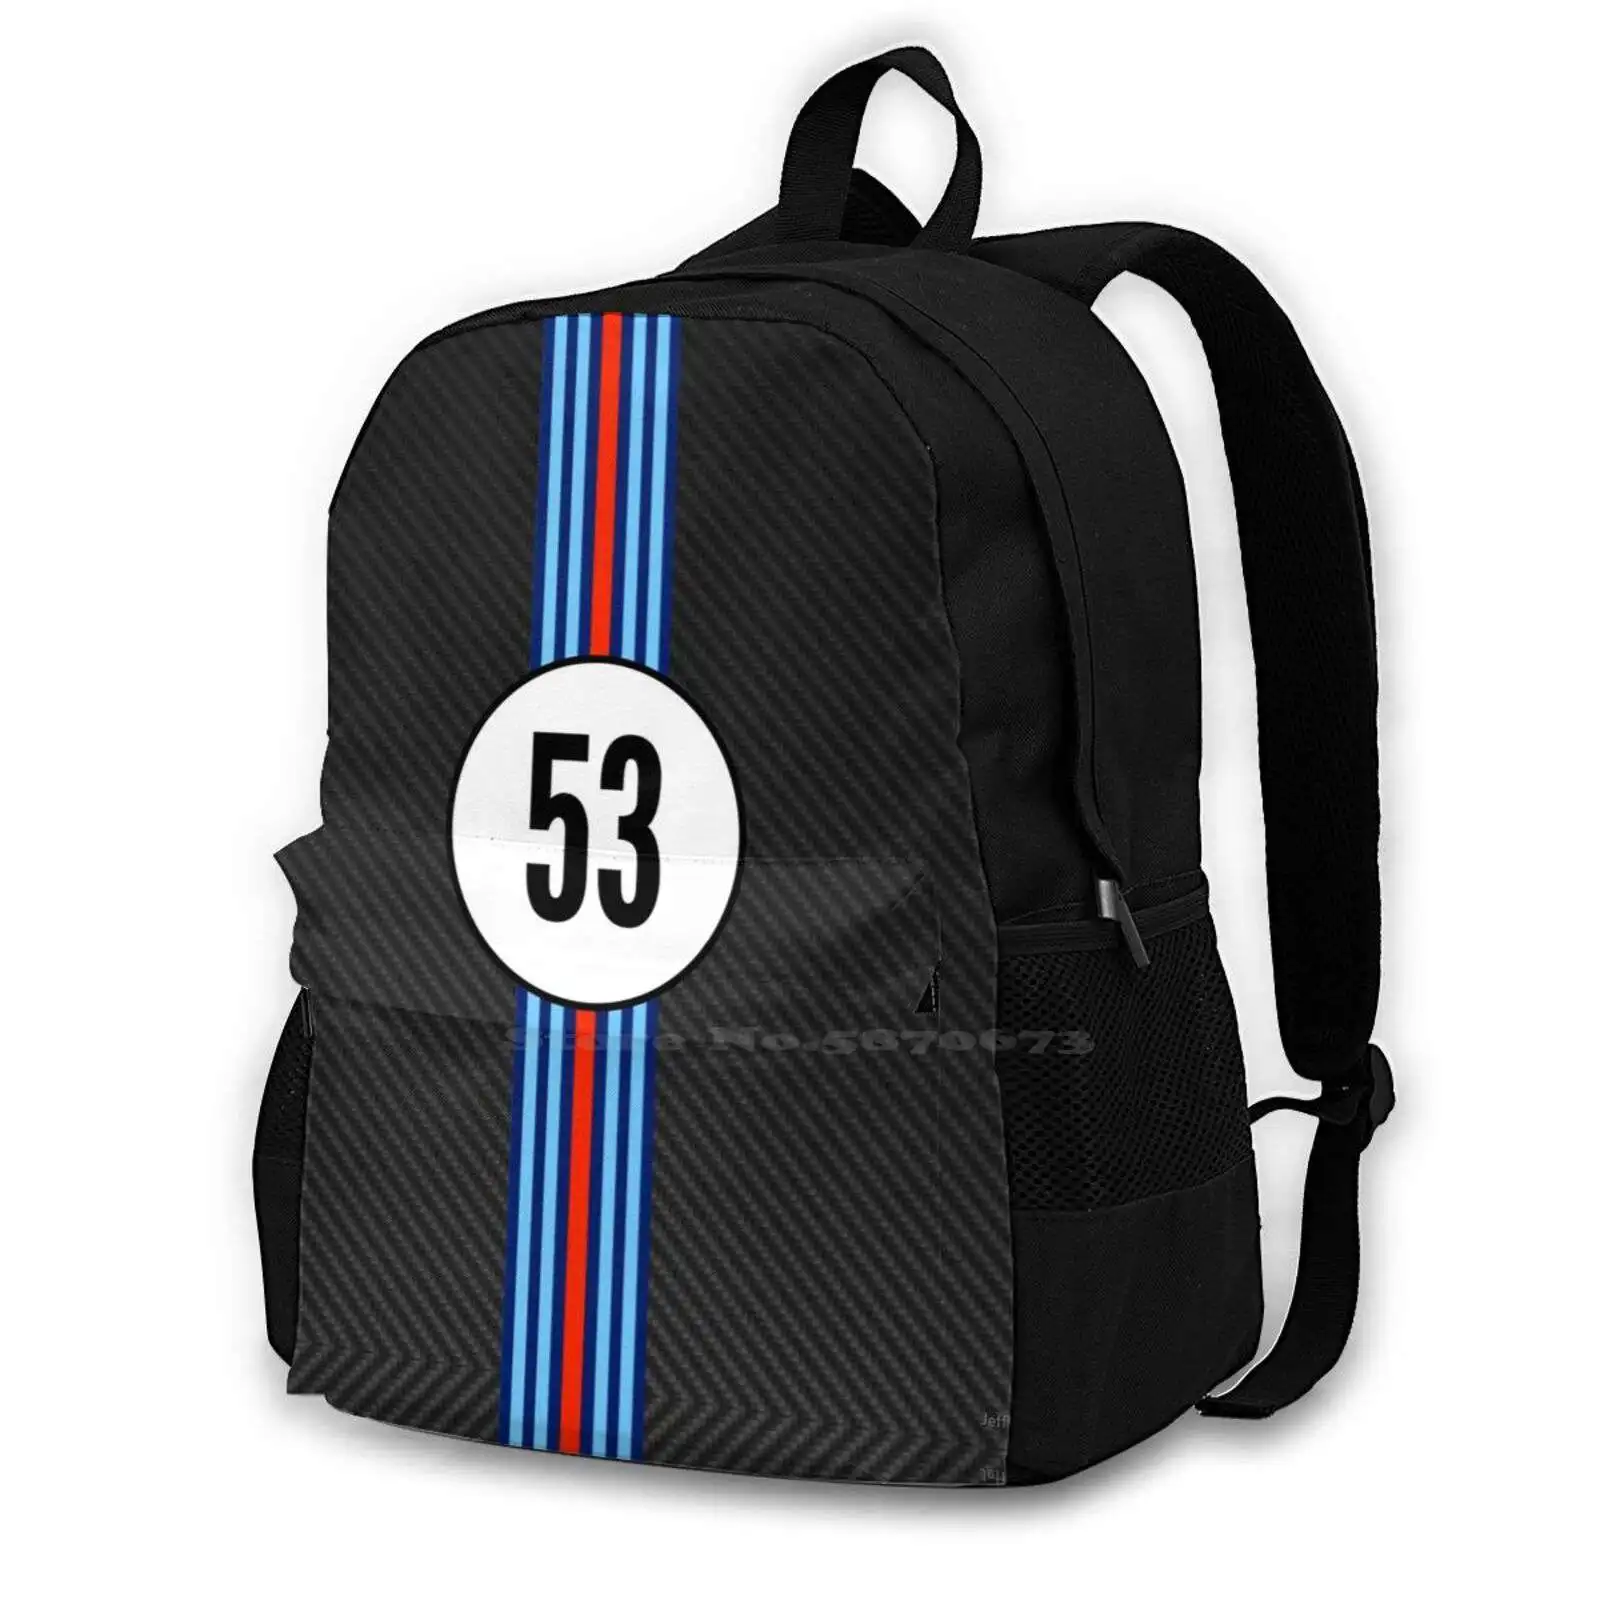 

Racing Stripes Carbon Background 53 School Bags For Teenage Girls Laptop Travel Bags Optic Gaming Advan Toyo Tires Martini